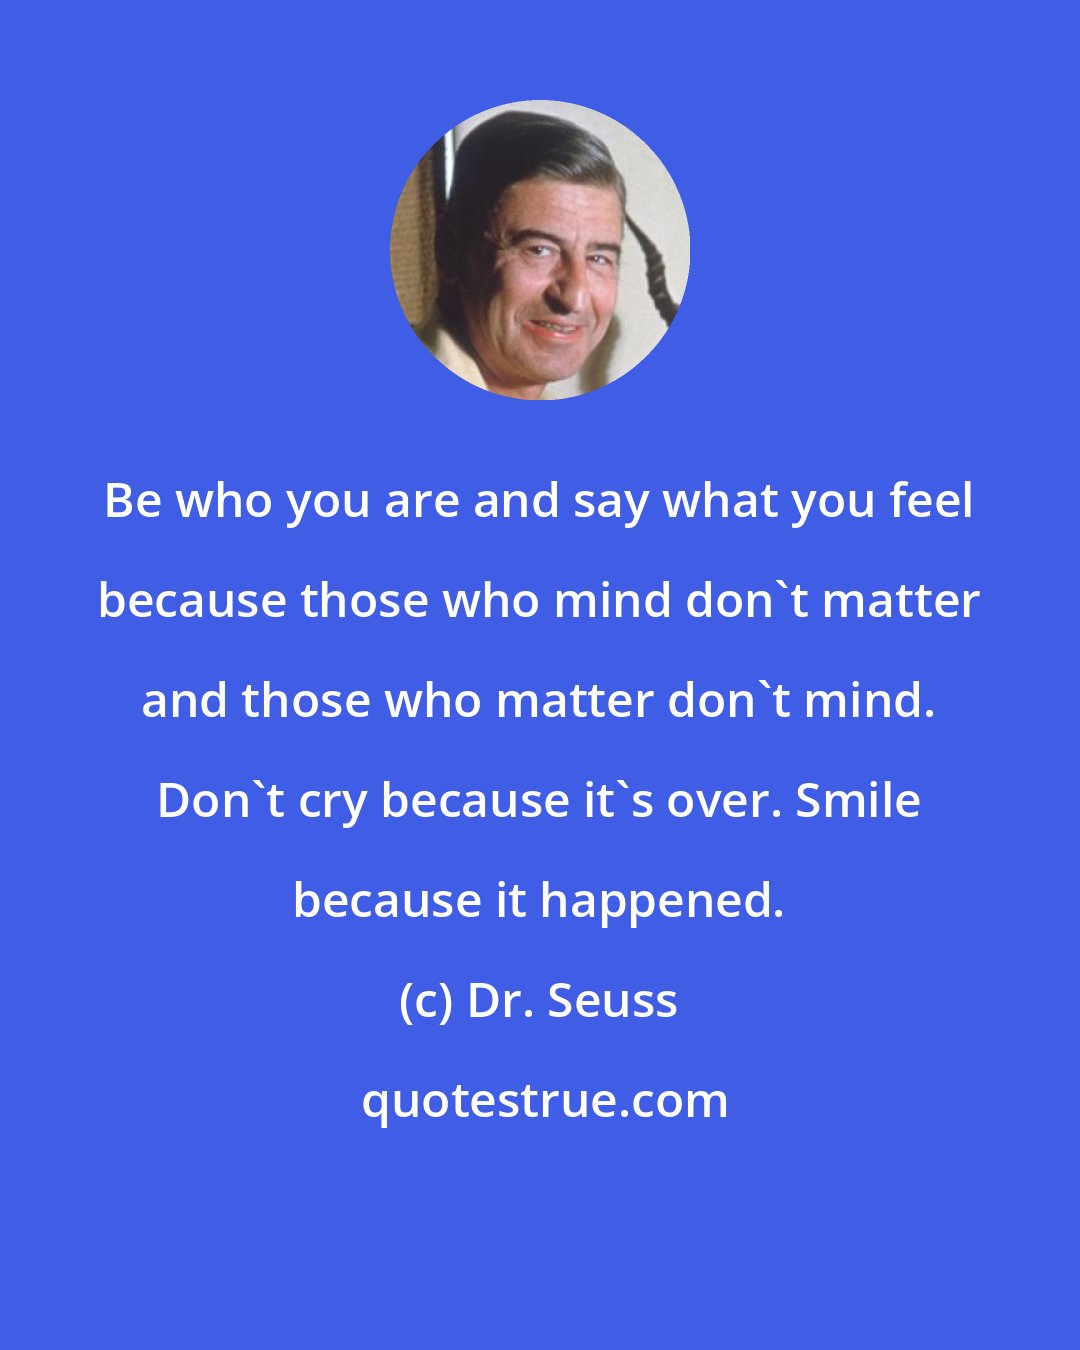 Dr. Seuss: Be who you are and say what you feel because those who mind don't matter and those who matter don't mind. Don't cry because it's over. Smile because it happened.